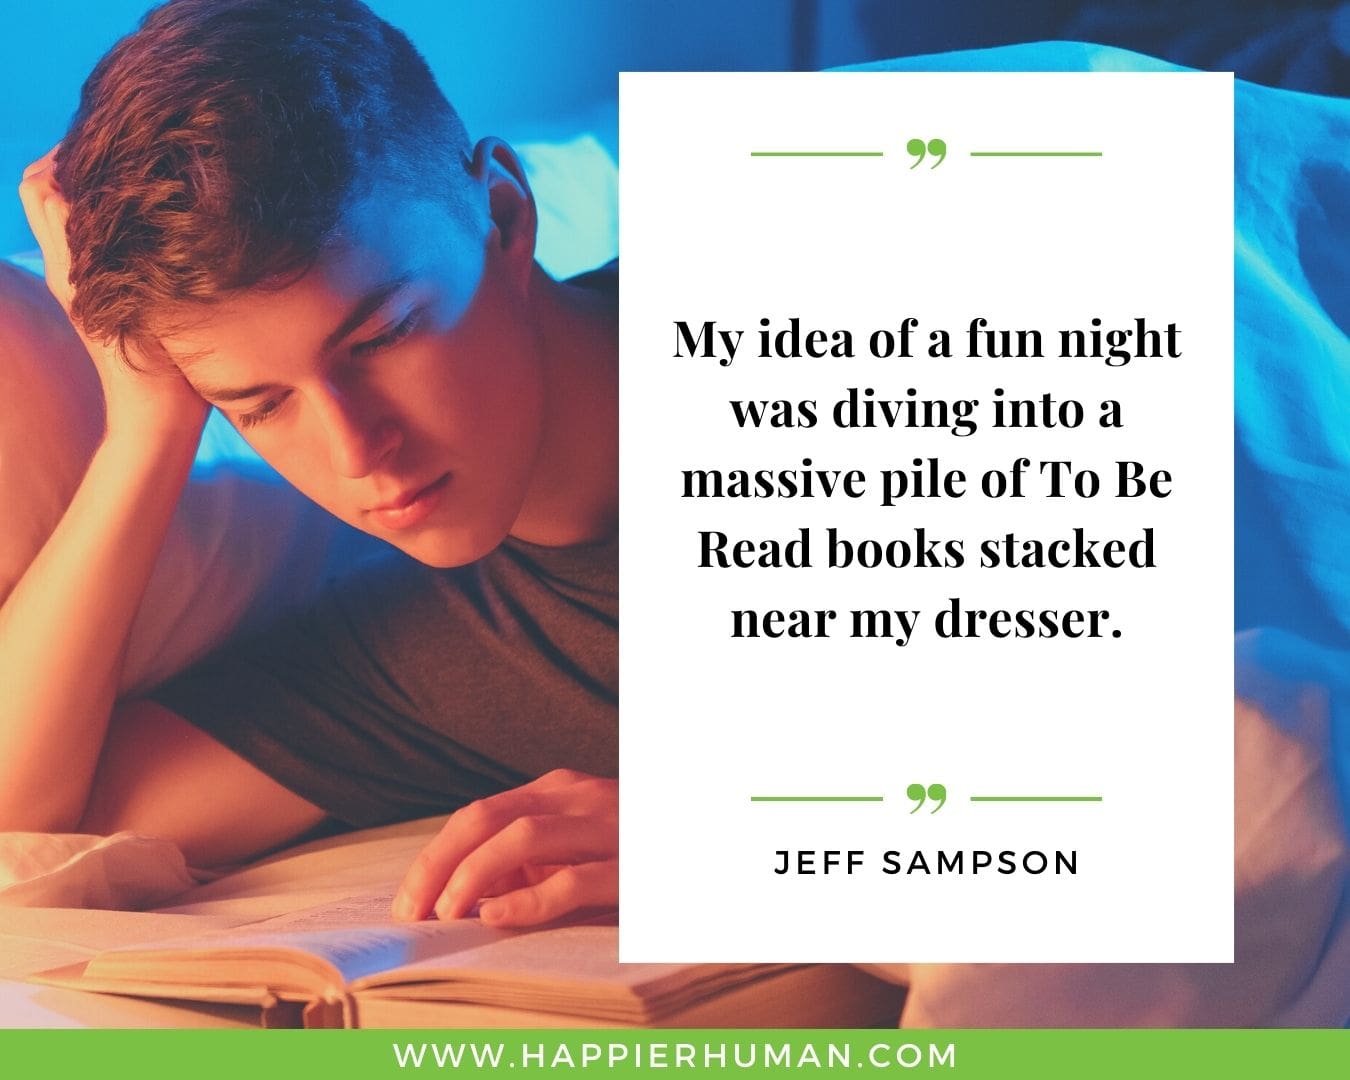 Introvert Quotes - “My idea of a fun night was diving into a massive pile of To Be Read books stacked near my dresser.” – Jeff Sampson